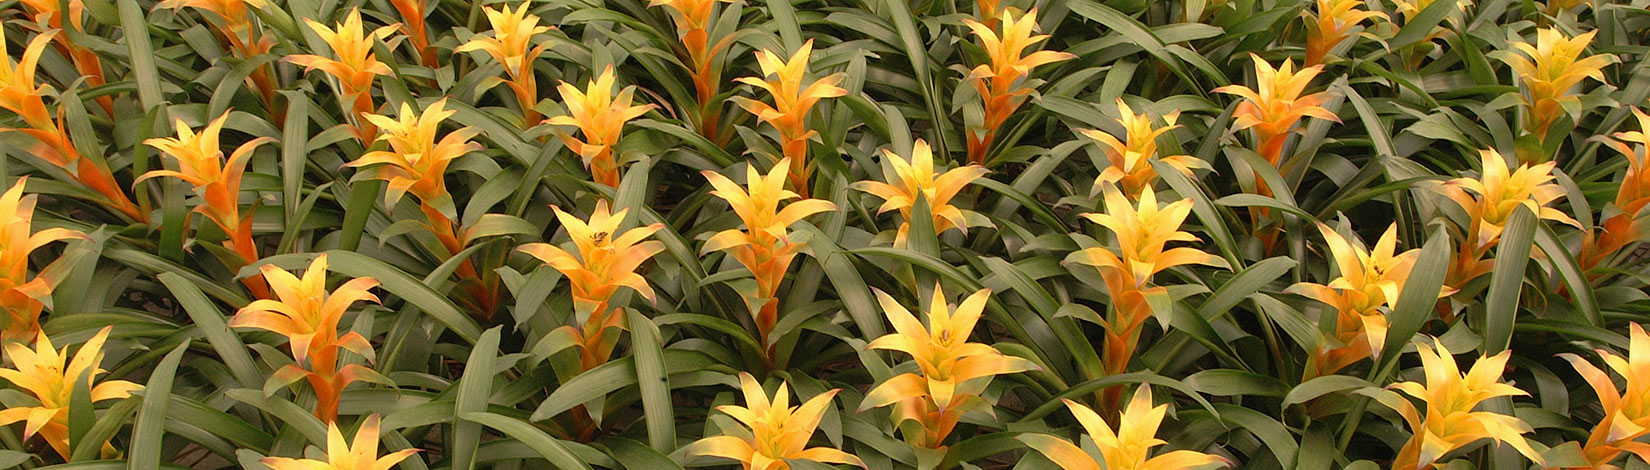 Many yellow-tipped bromeliad plants 